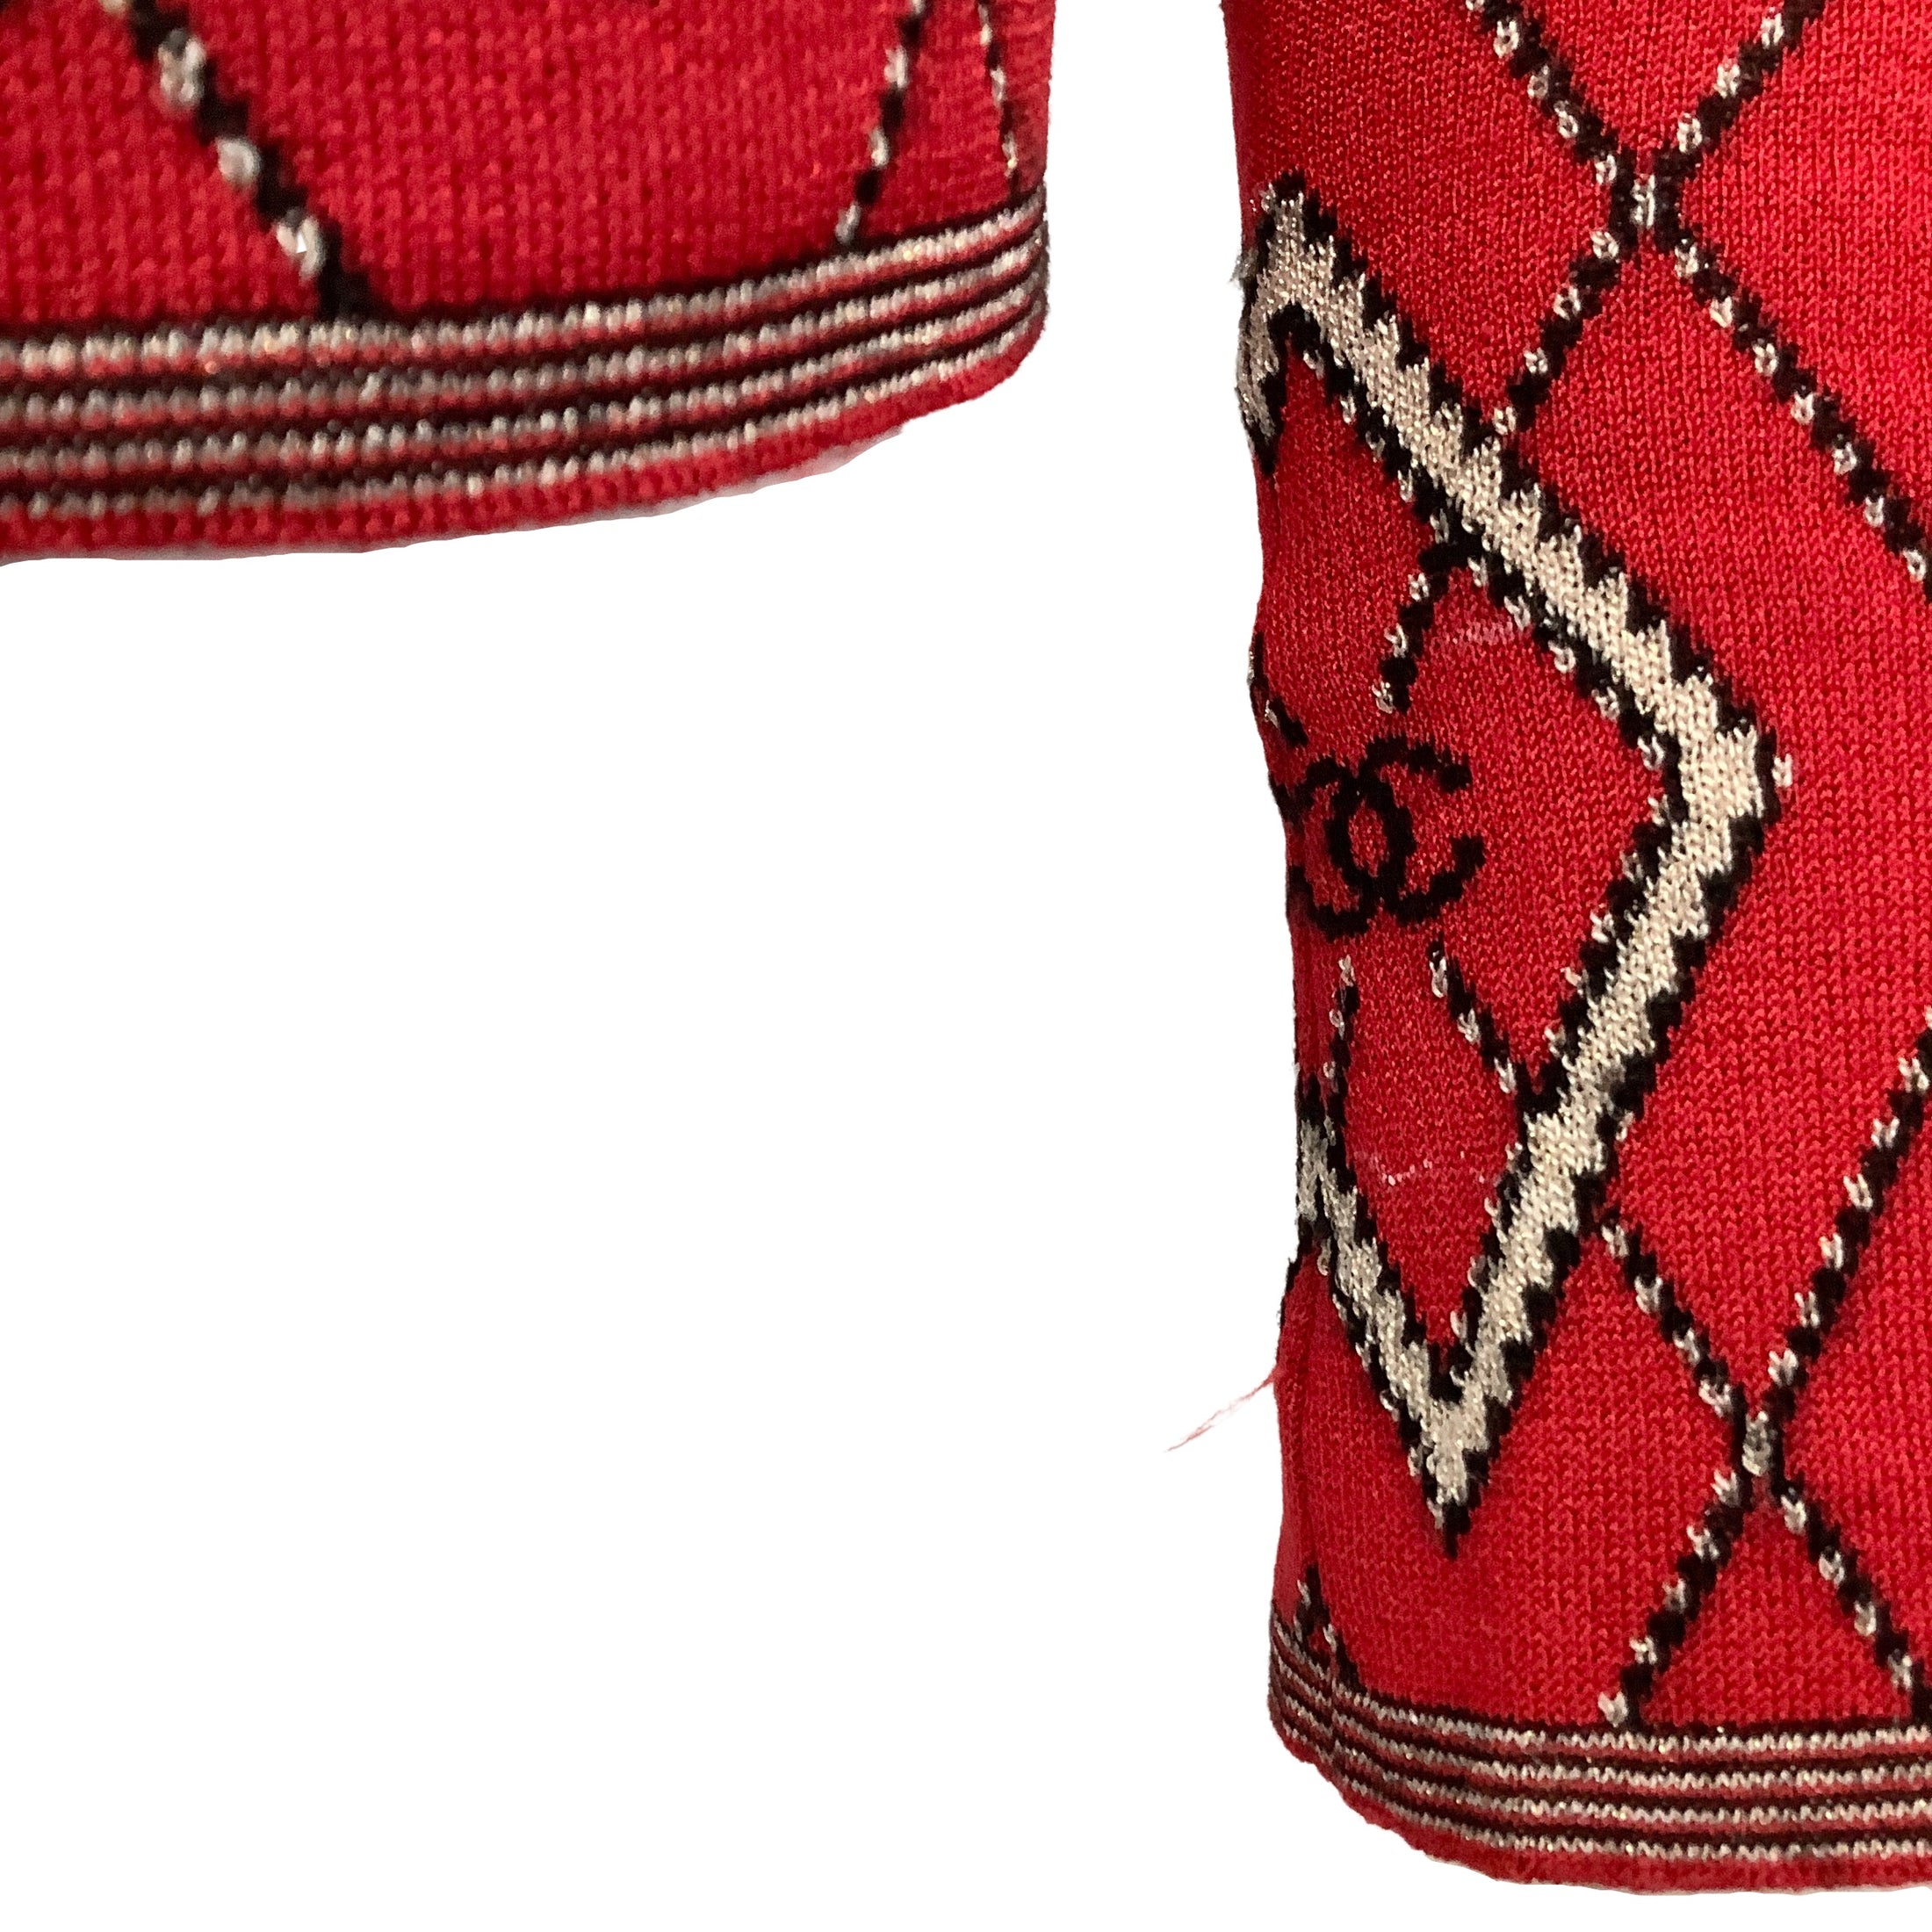 Chanel Sequined Diamond Red / Black / White Sweater